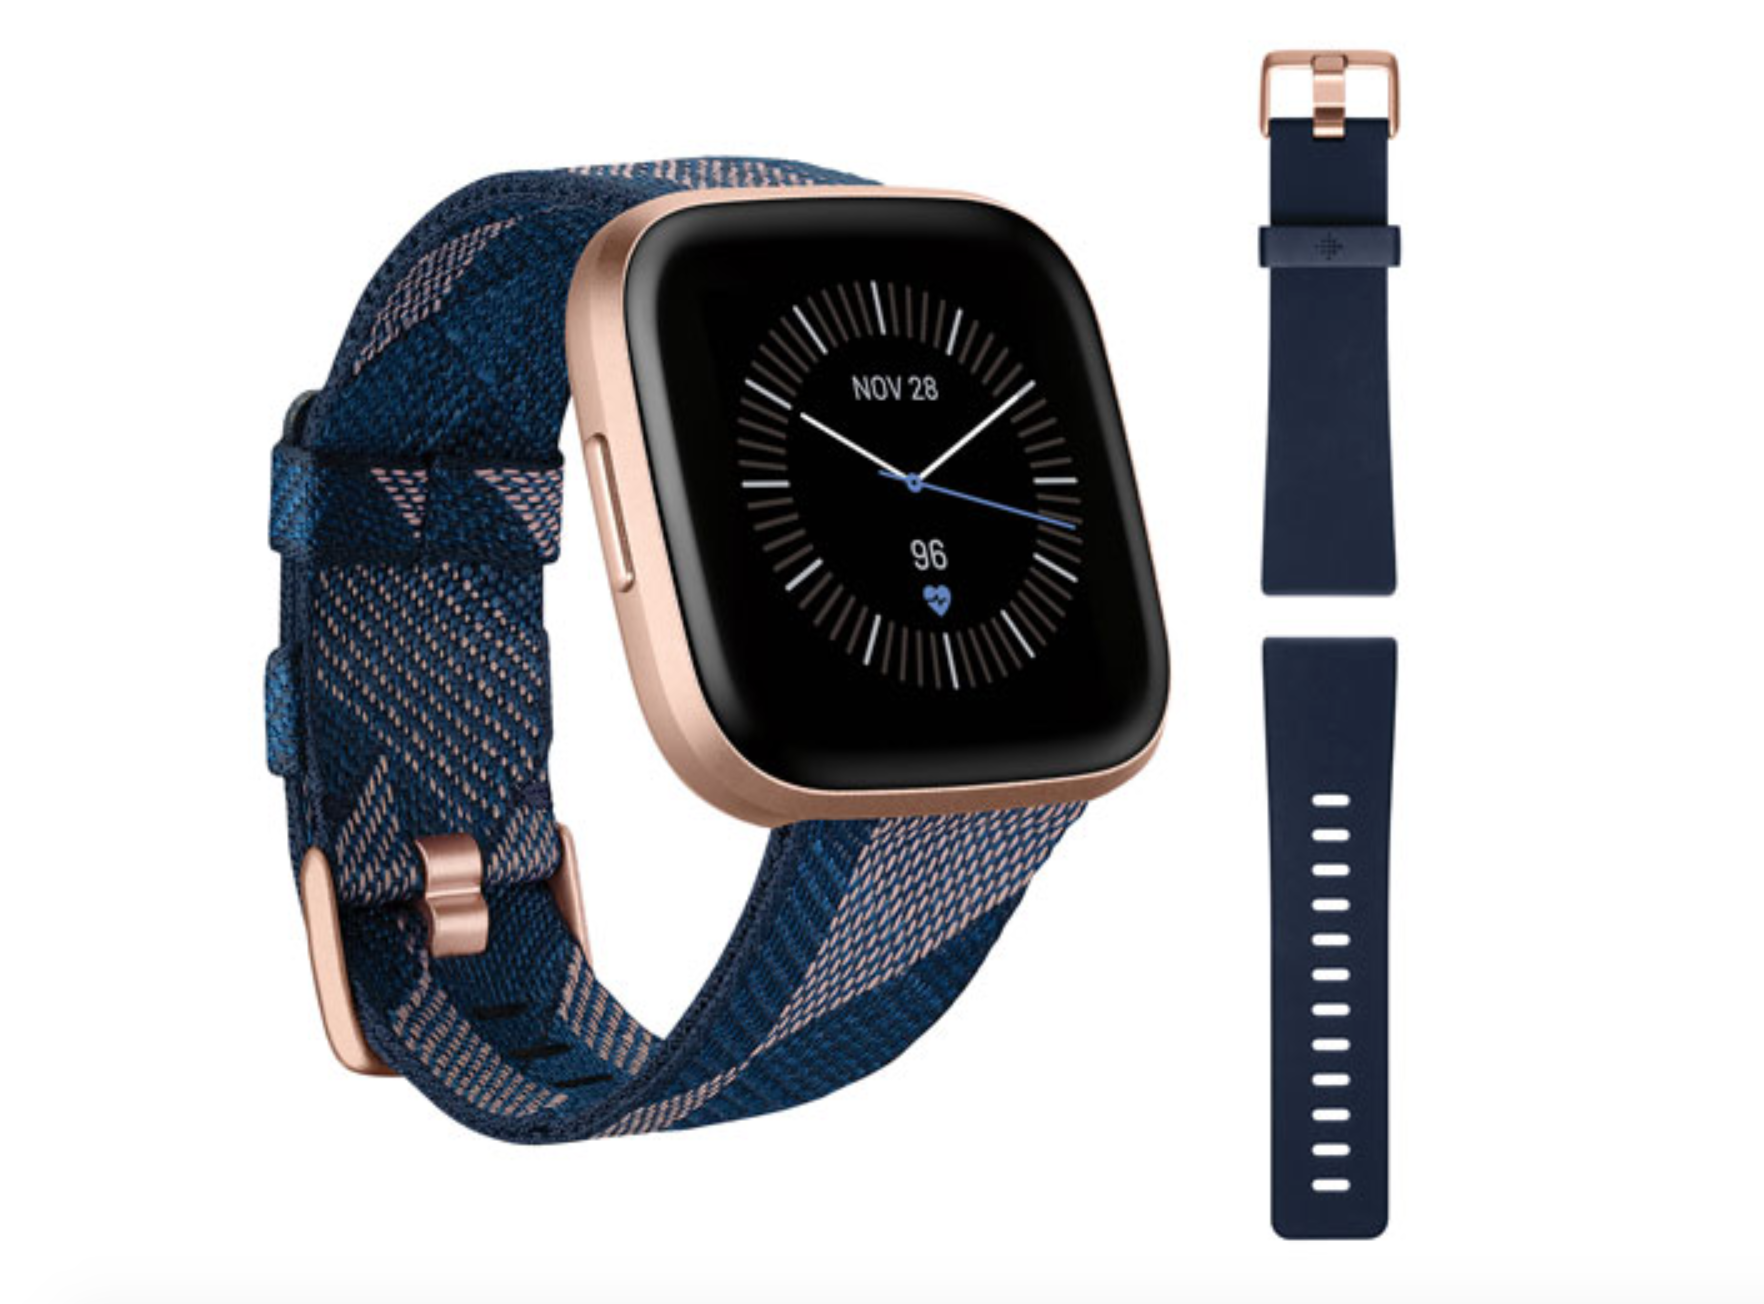 image of the Fitbit Versa 2 Special Edition smartwatch with additional wrist strap